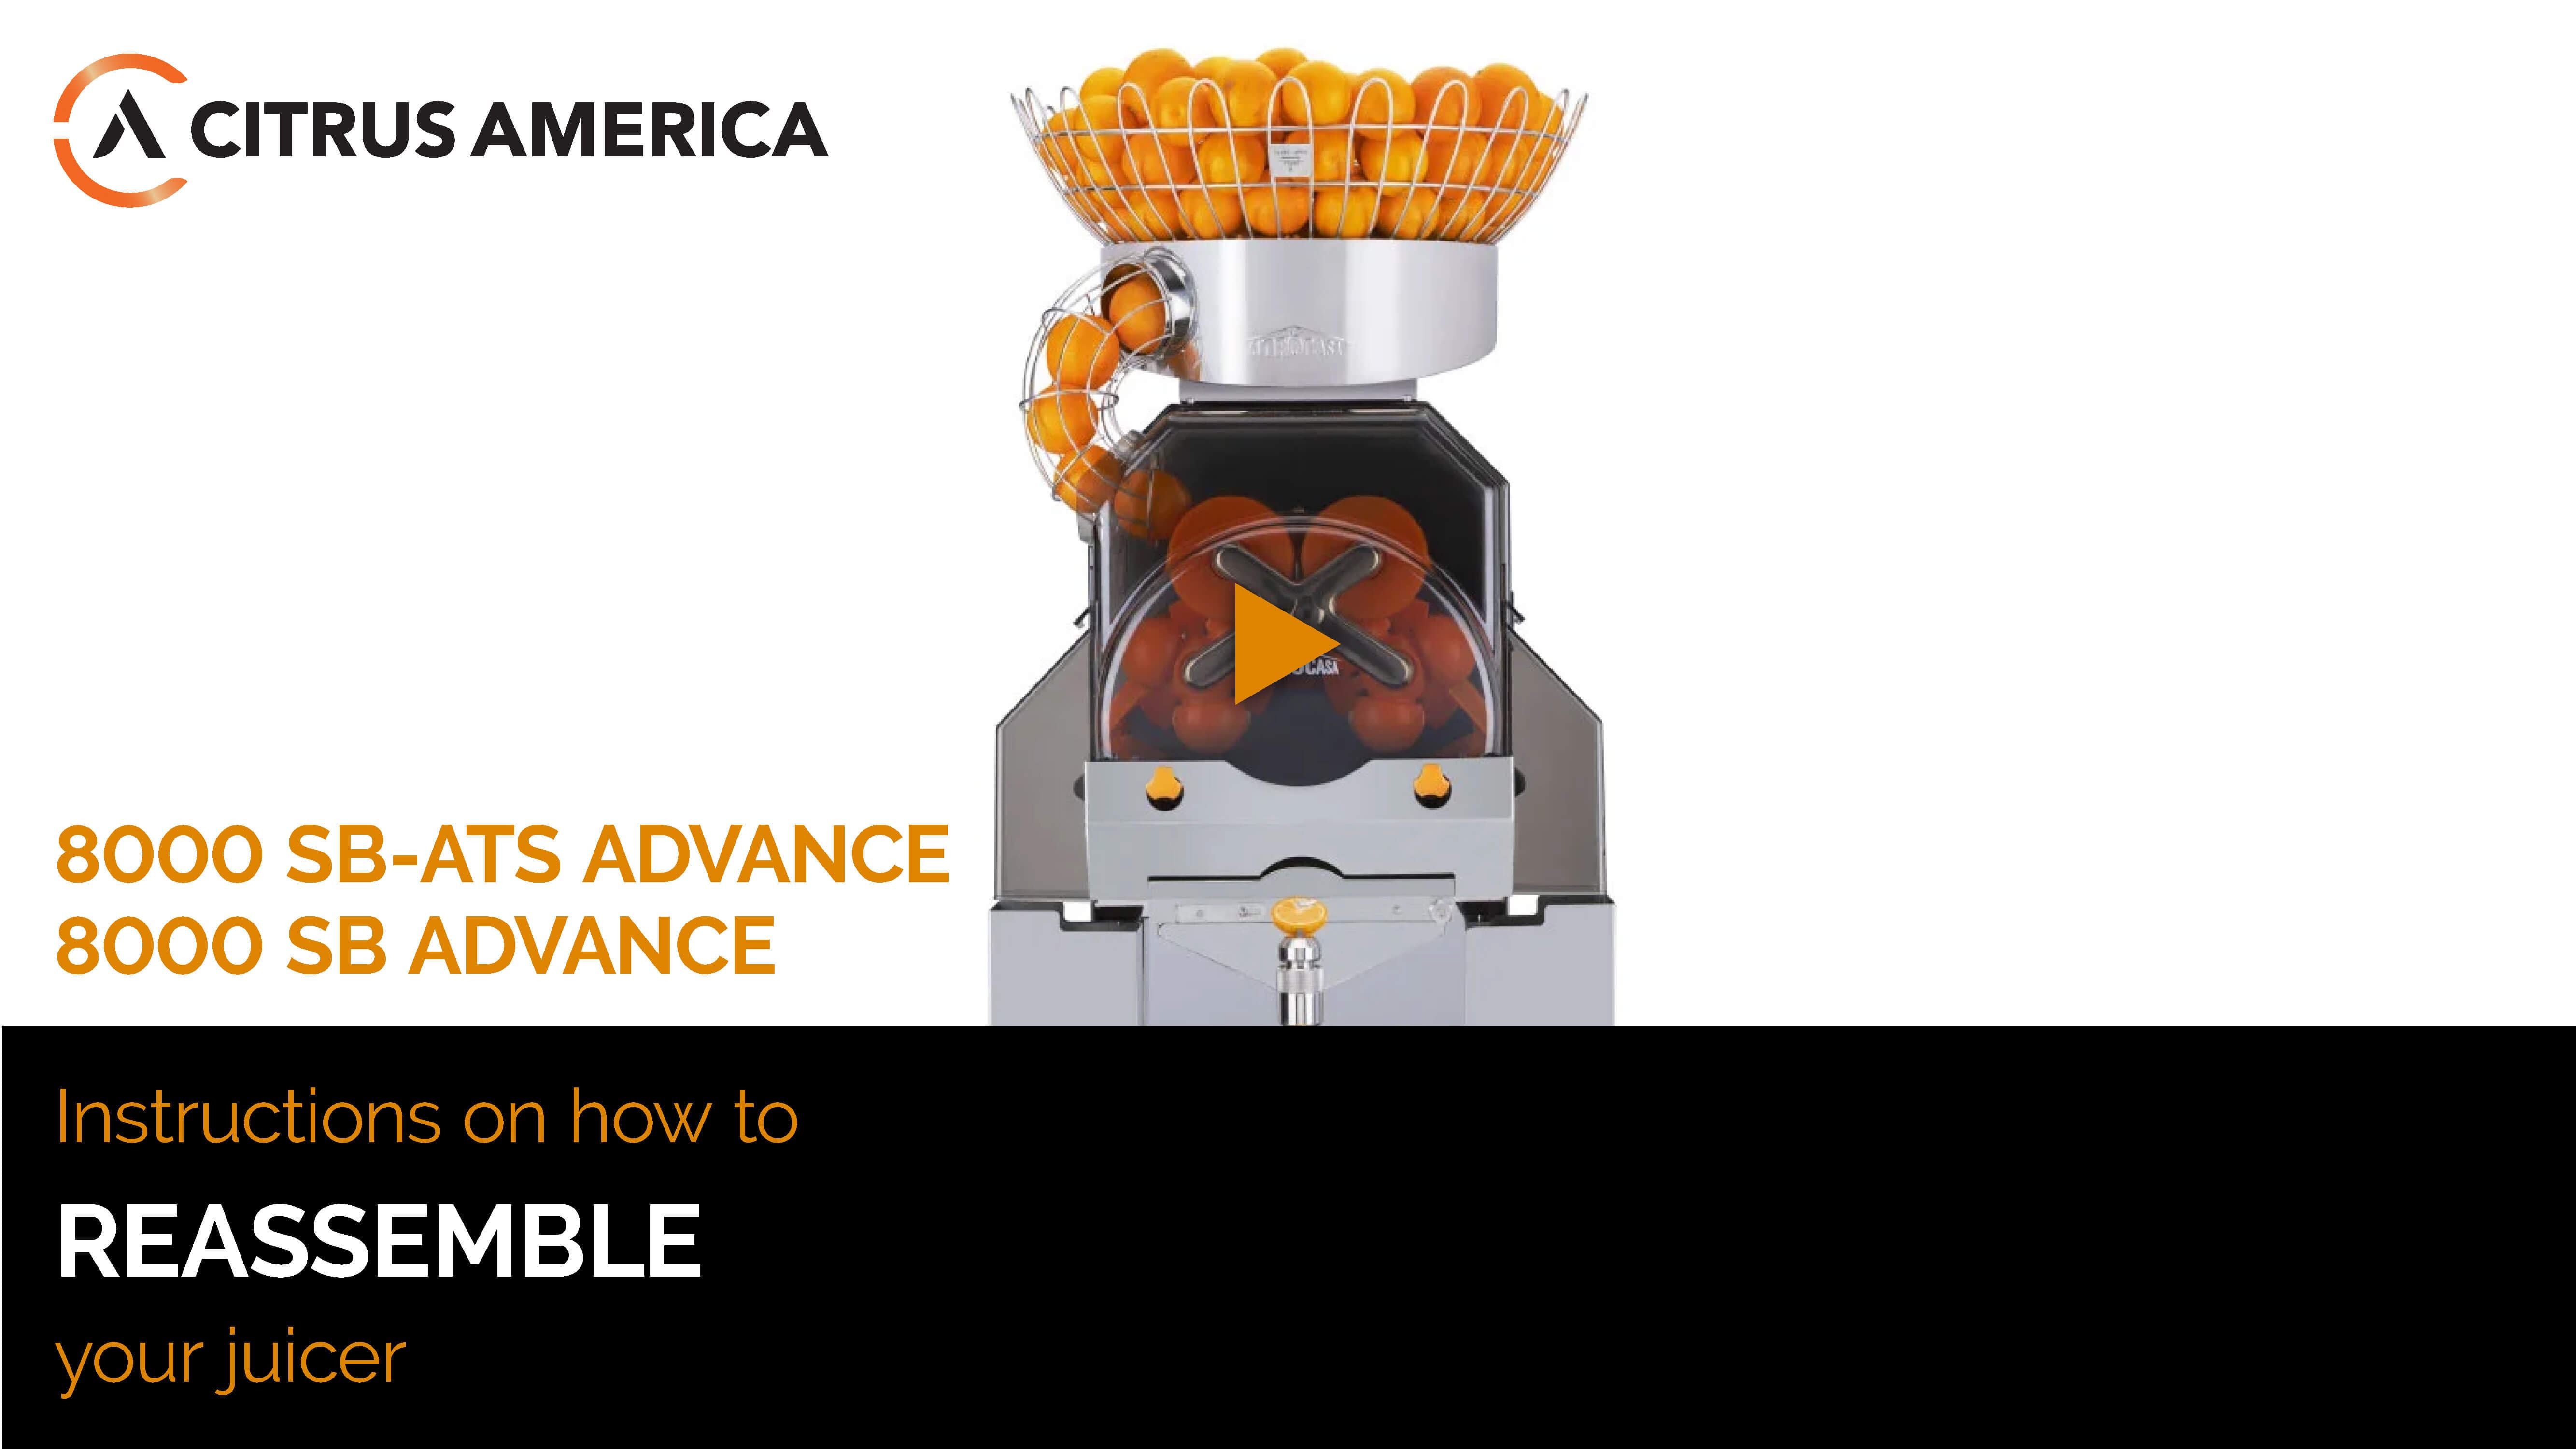 Front view of a Citrus America juicer with oranges in the feeder basket. The image includes text that reads "8000 SB-ATS ADVANCE, 8000 SB ADVANCE" and "Instructions on how to REASSEMBLE your juicer." A training video is available for more detailed guidance.